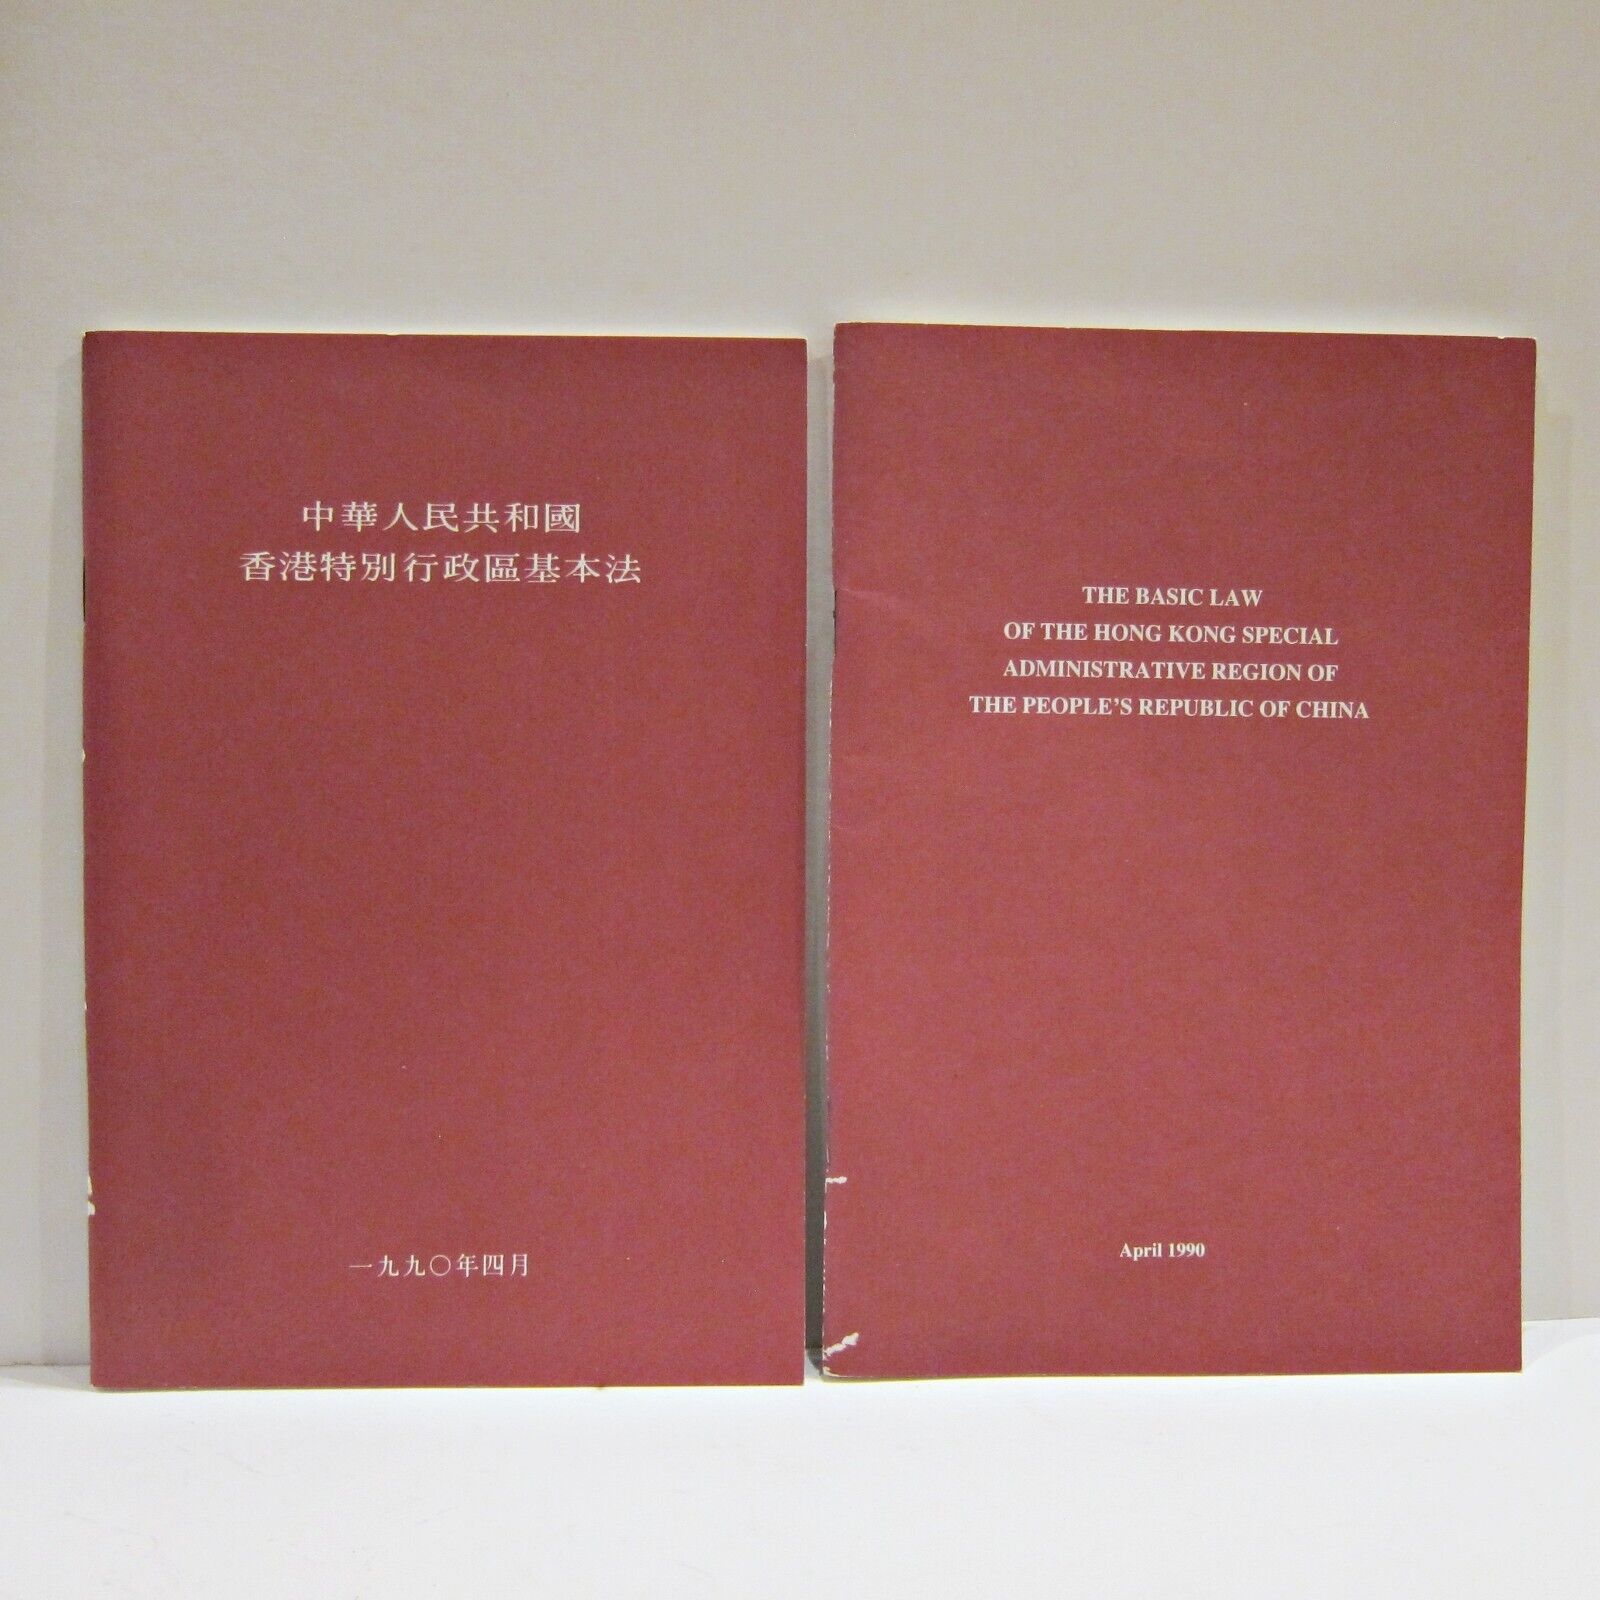 THE BASIC LAW OF THE HONG KONG SAR - 1990 -  English and Chinese Books